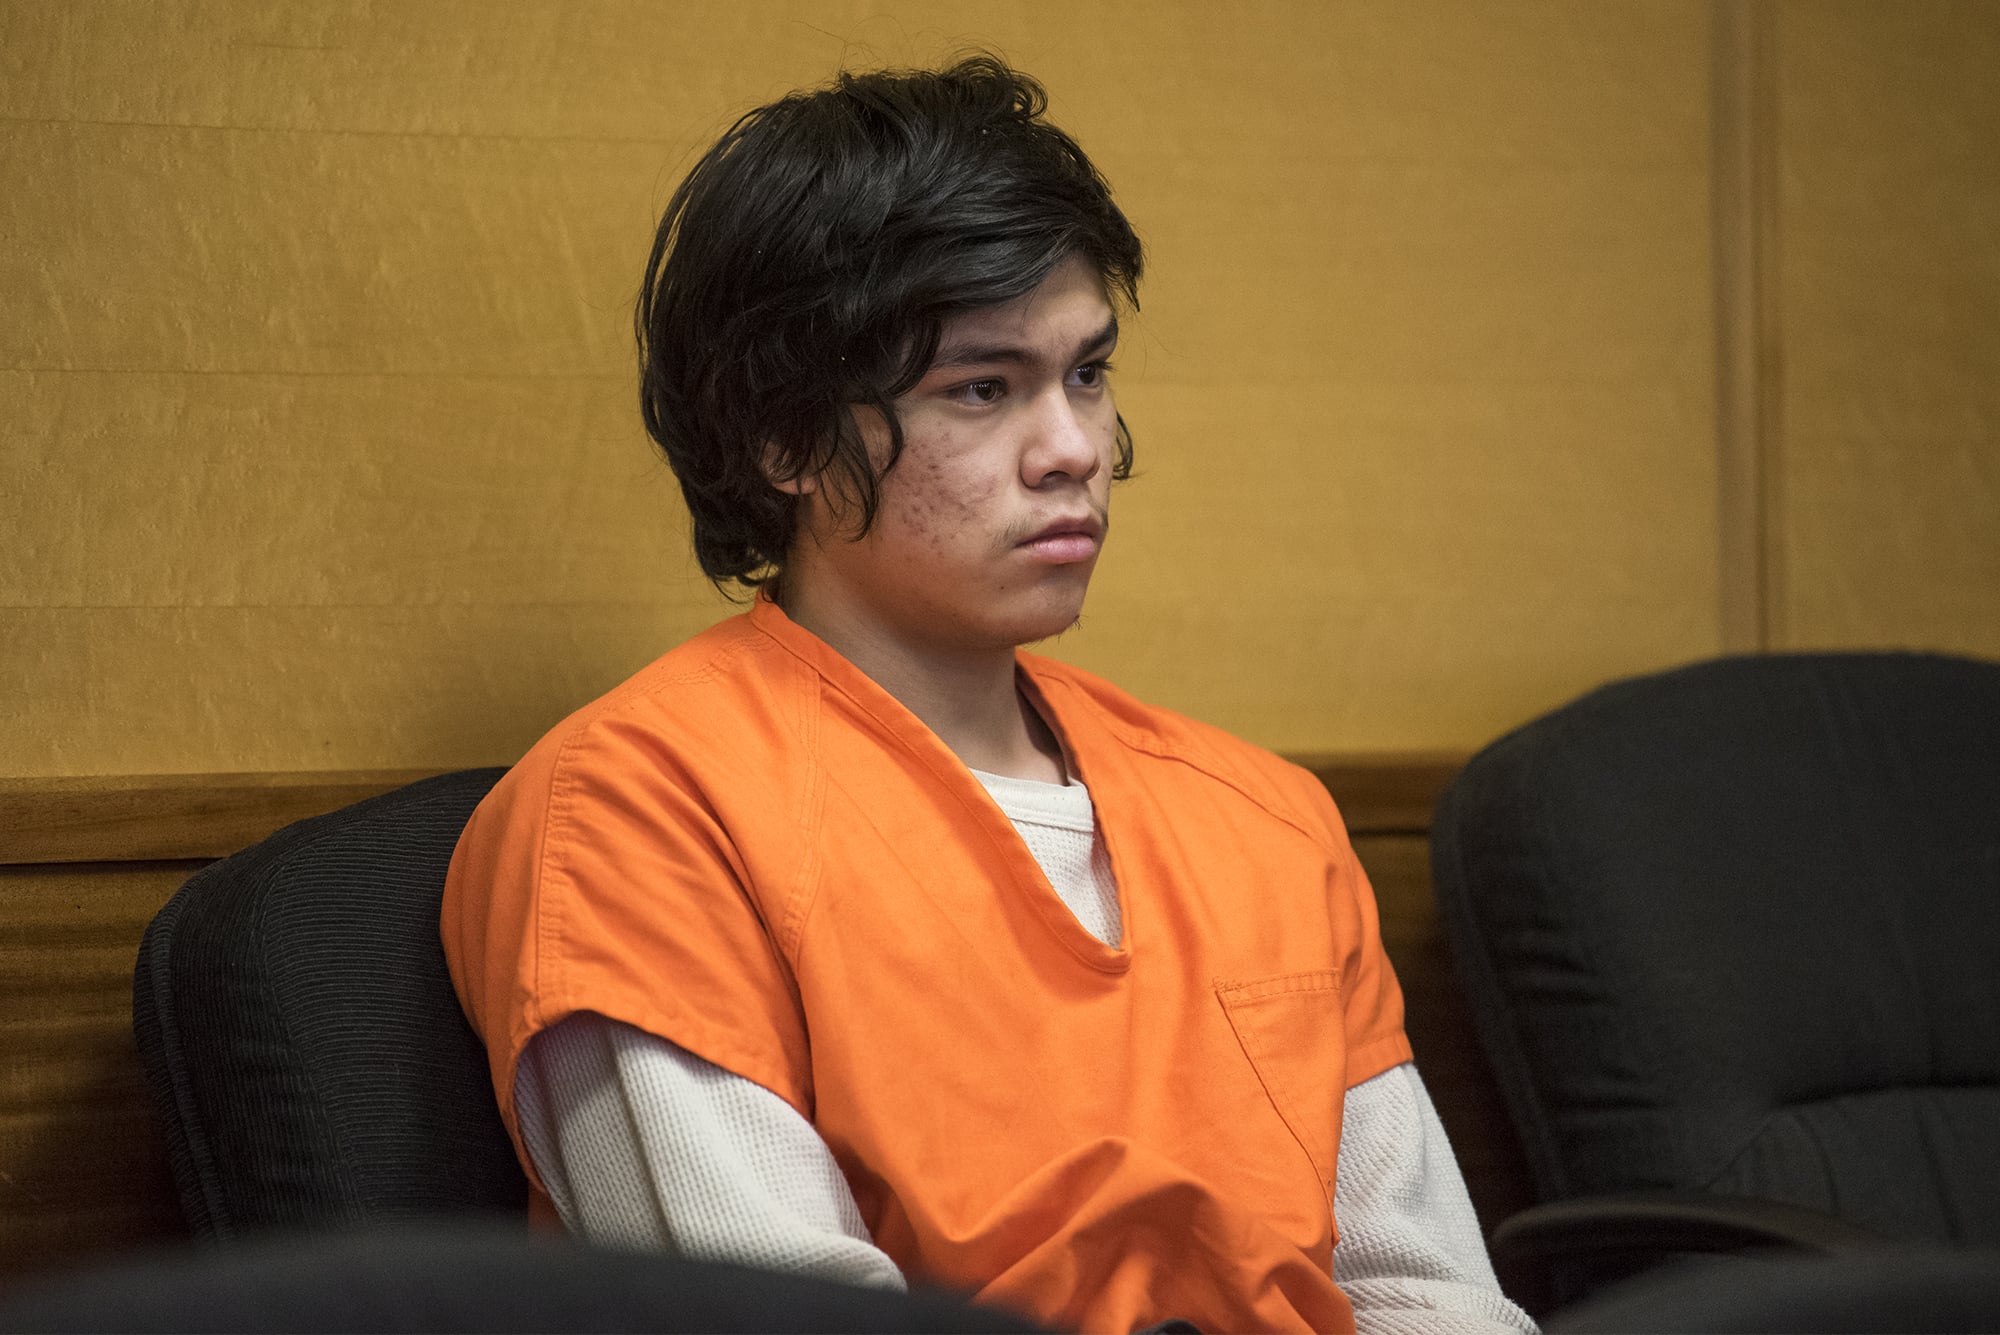 Francisco Javier Hernandez-Reyes, 18, appears for a plea and sentencing hearing at Clark County Superior Court on Friday morning, Jan. 25, 2019.